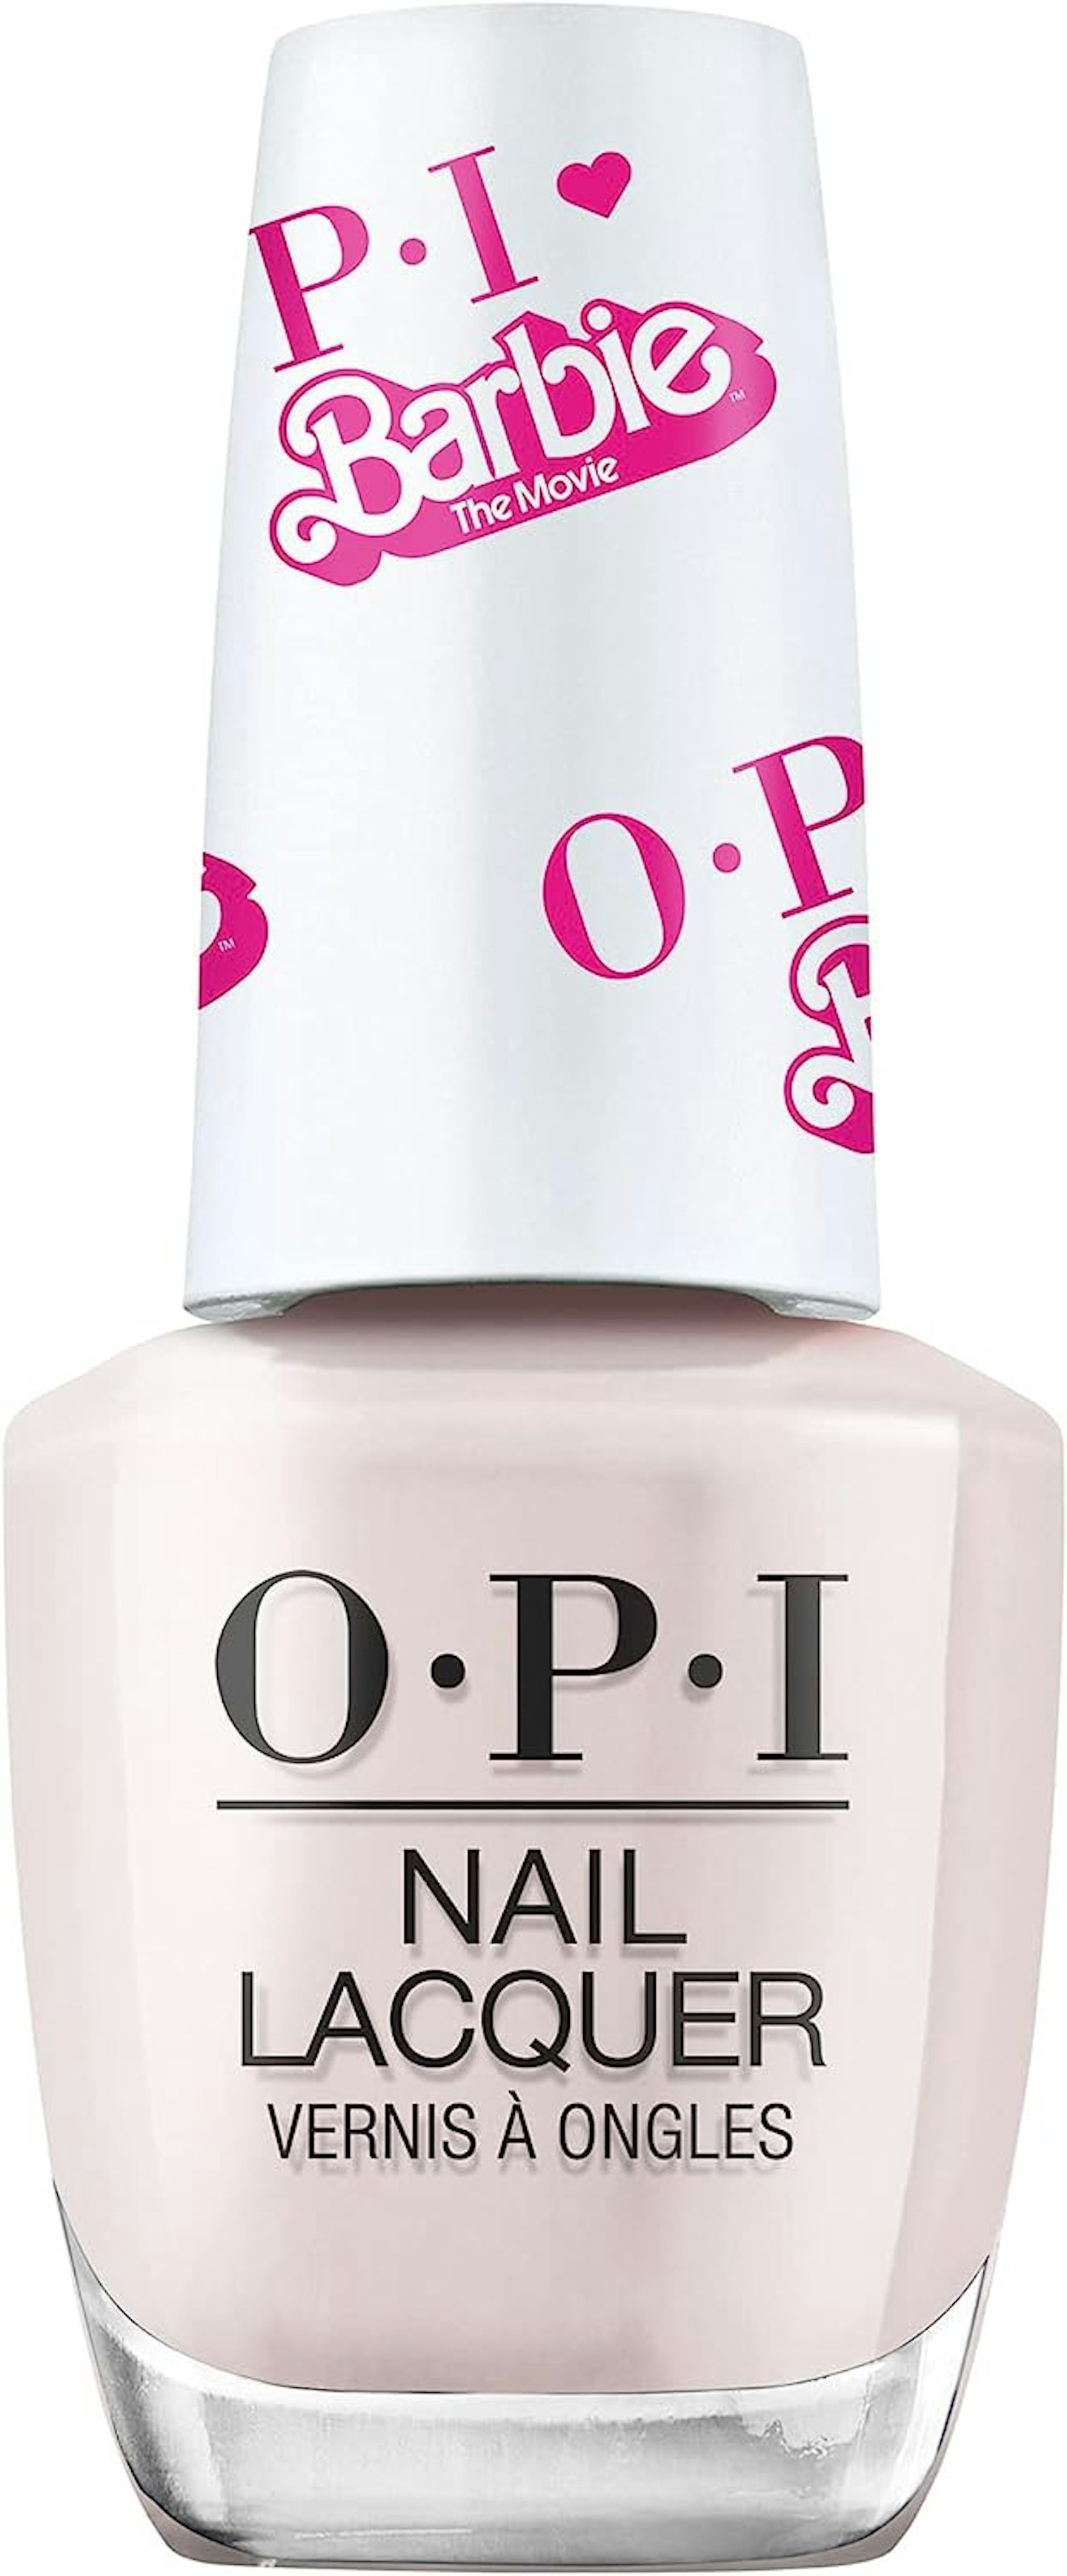 OPI x Barbie Collection, Bon Voyage to Reality! pink French manicure